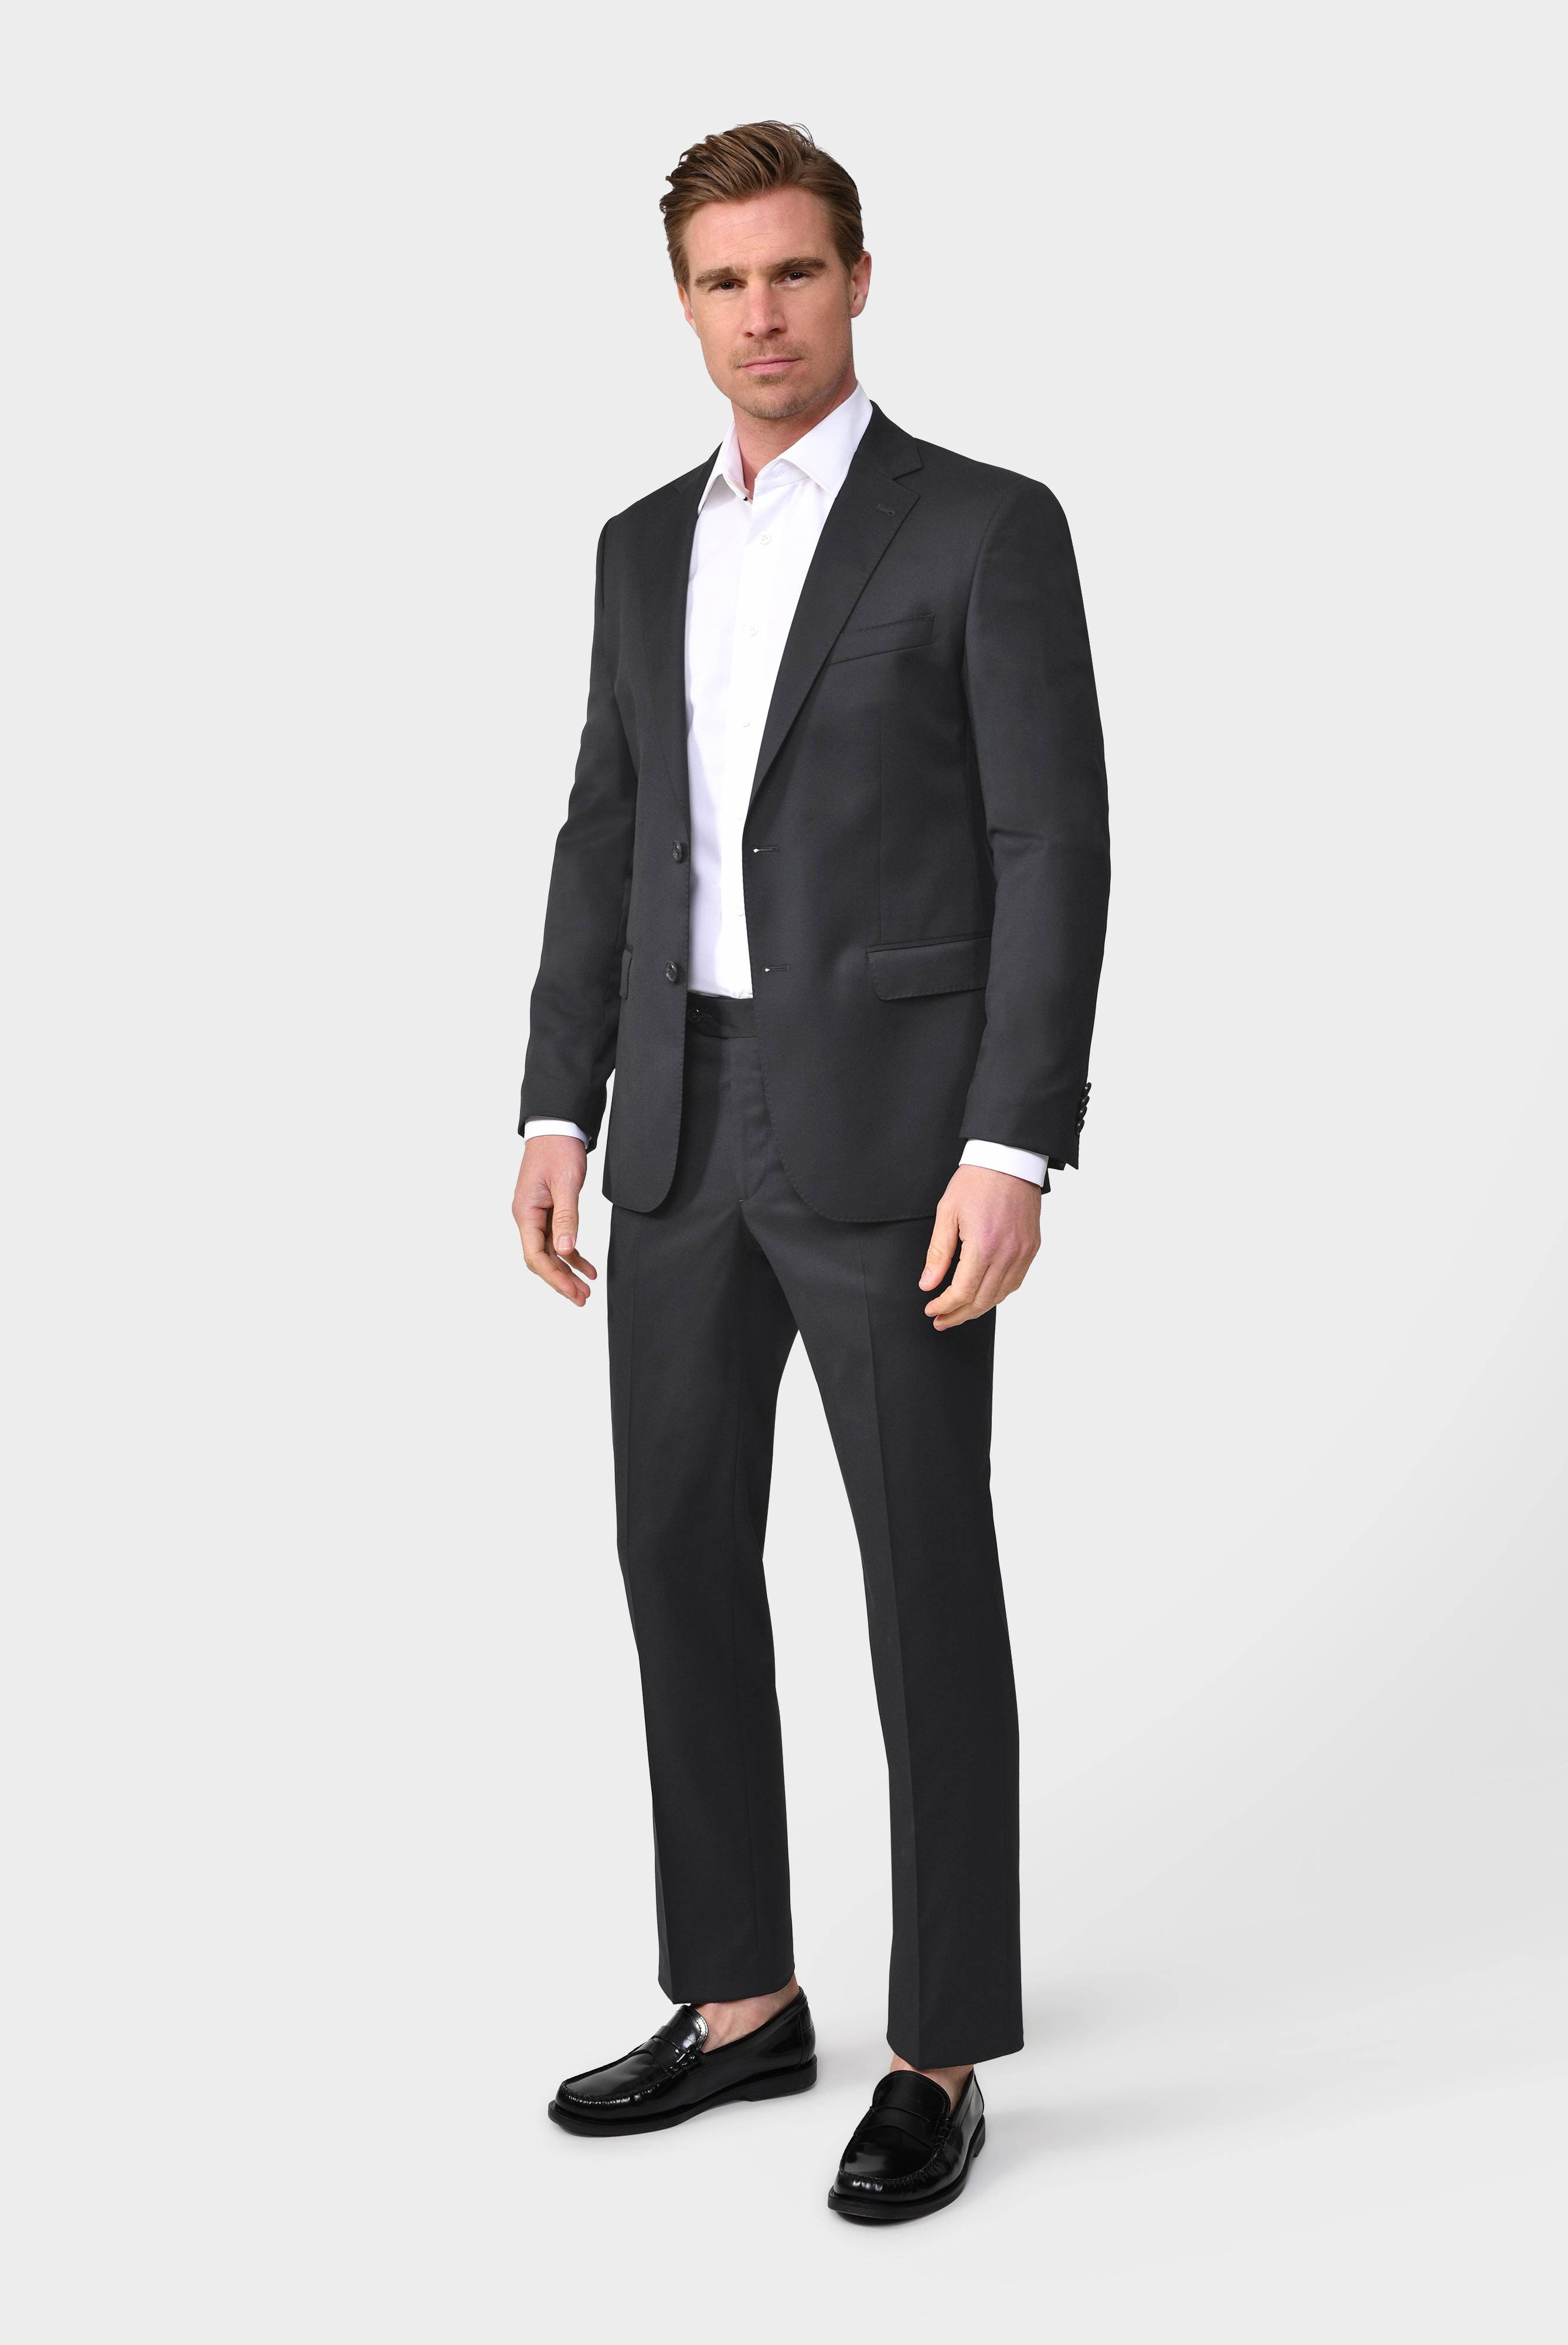 Jeans & Trousers+Men''s pants made of merino wool+80.7804.16.H01000.090.29